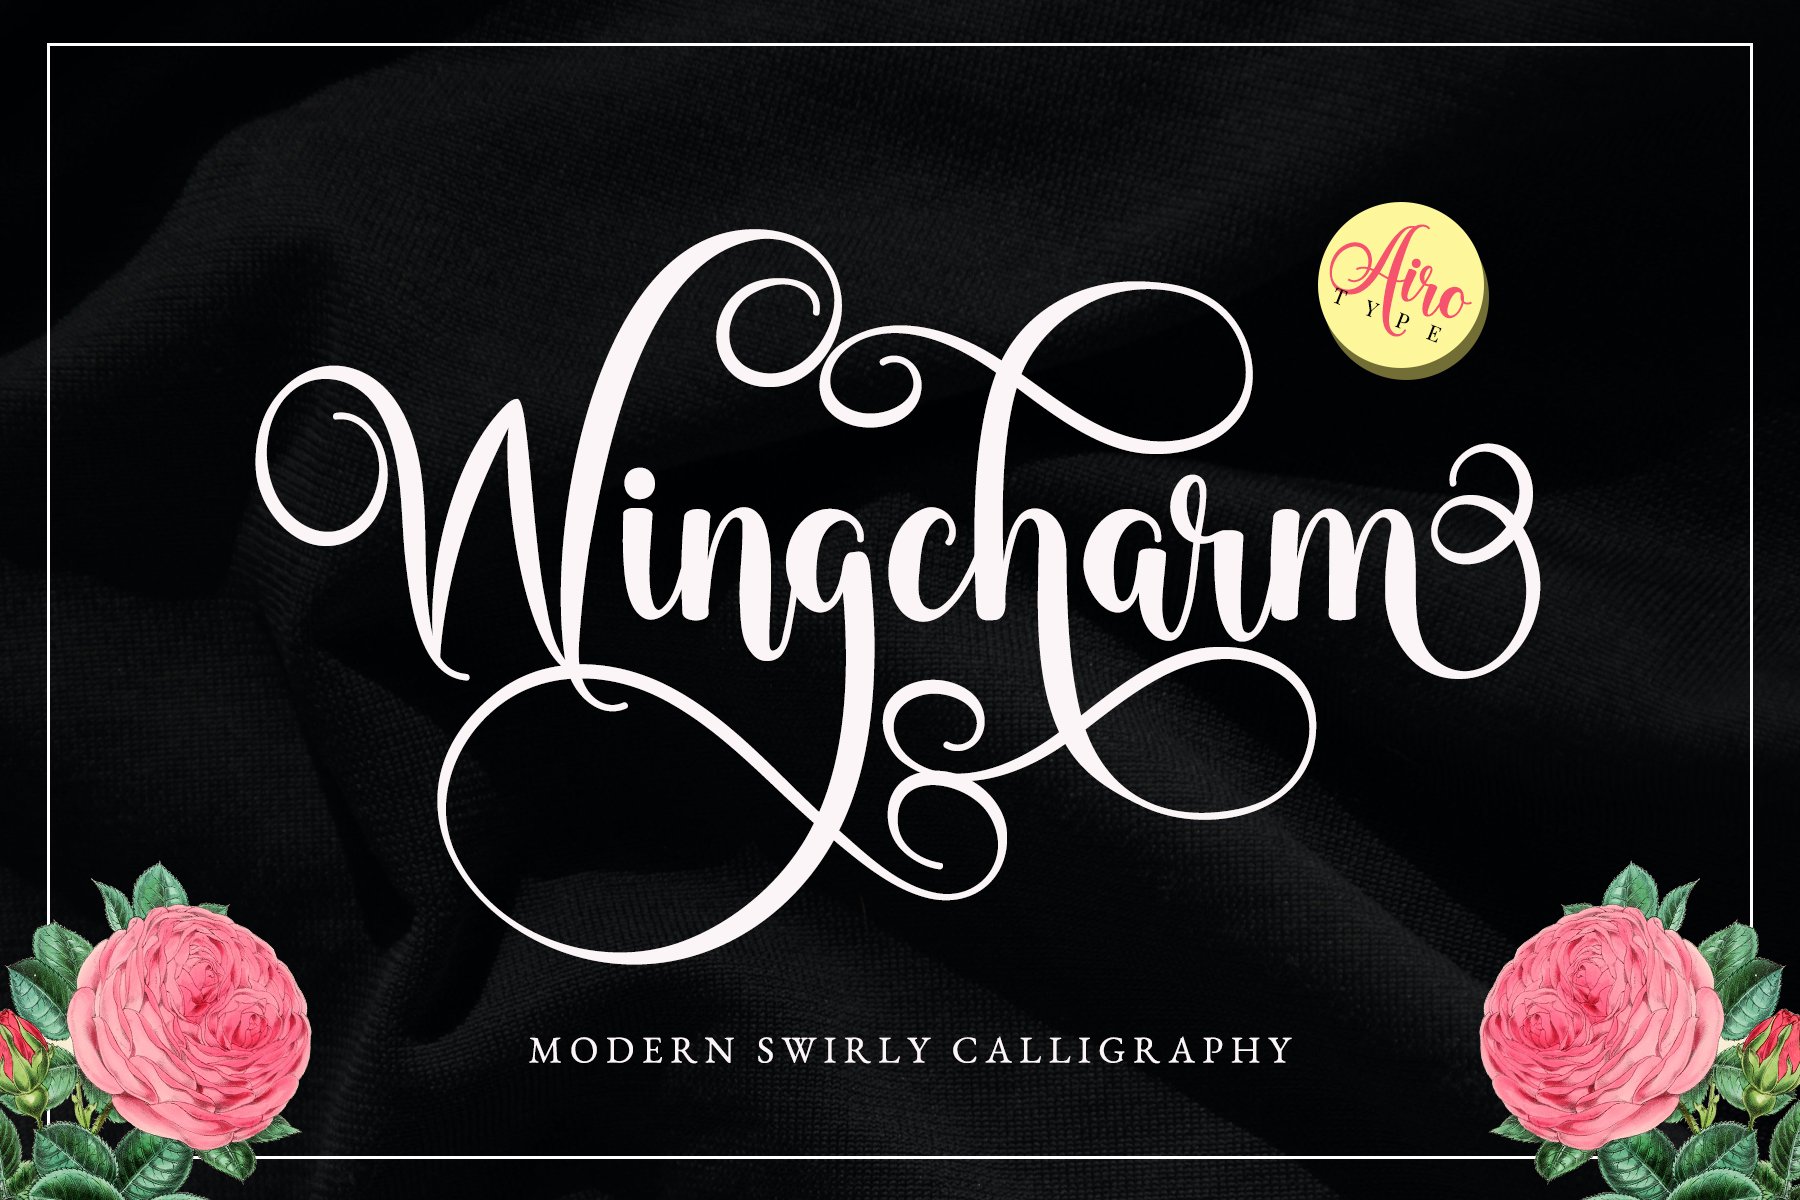 Wingcharm - Swirly Script Font cover image.